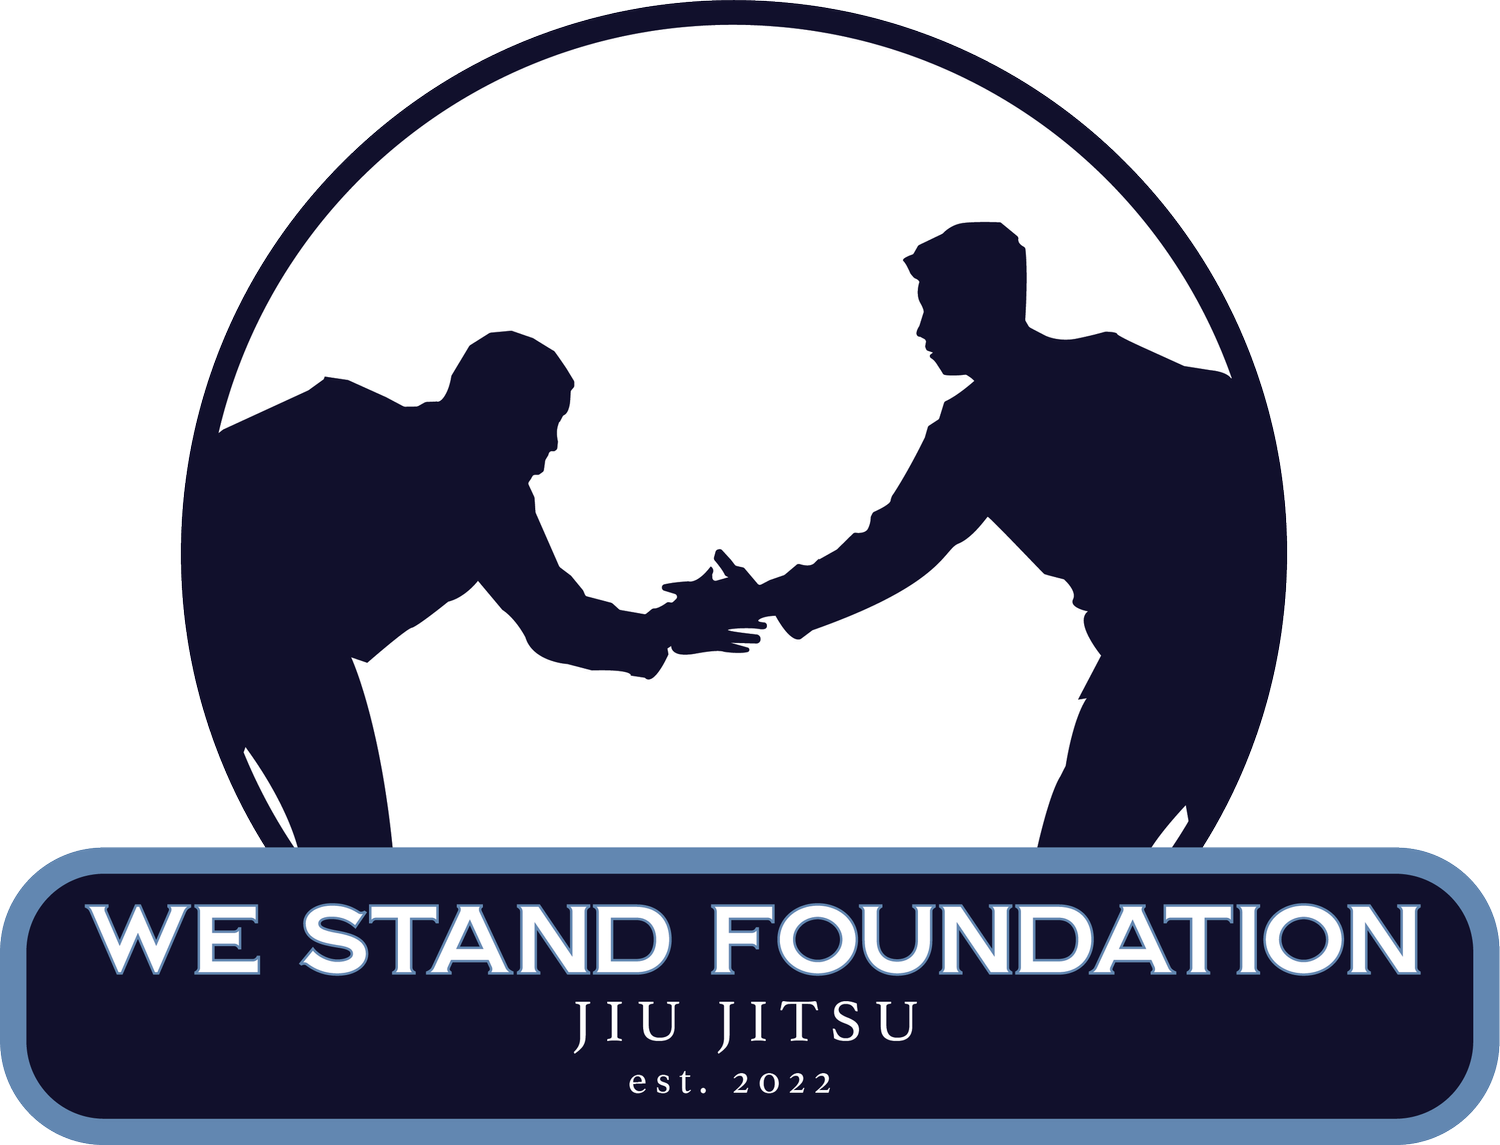 WE STAND FOUNDATION